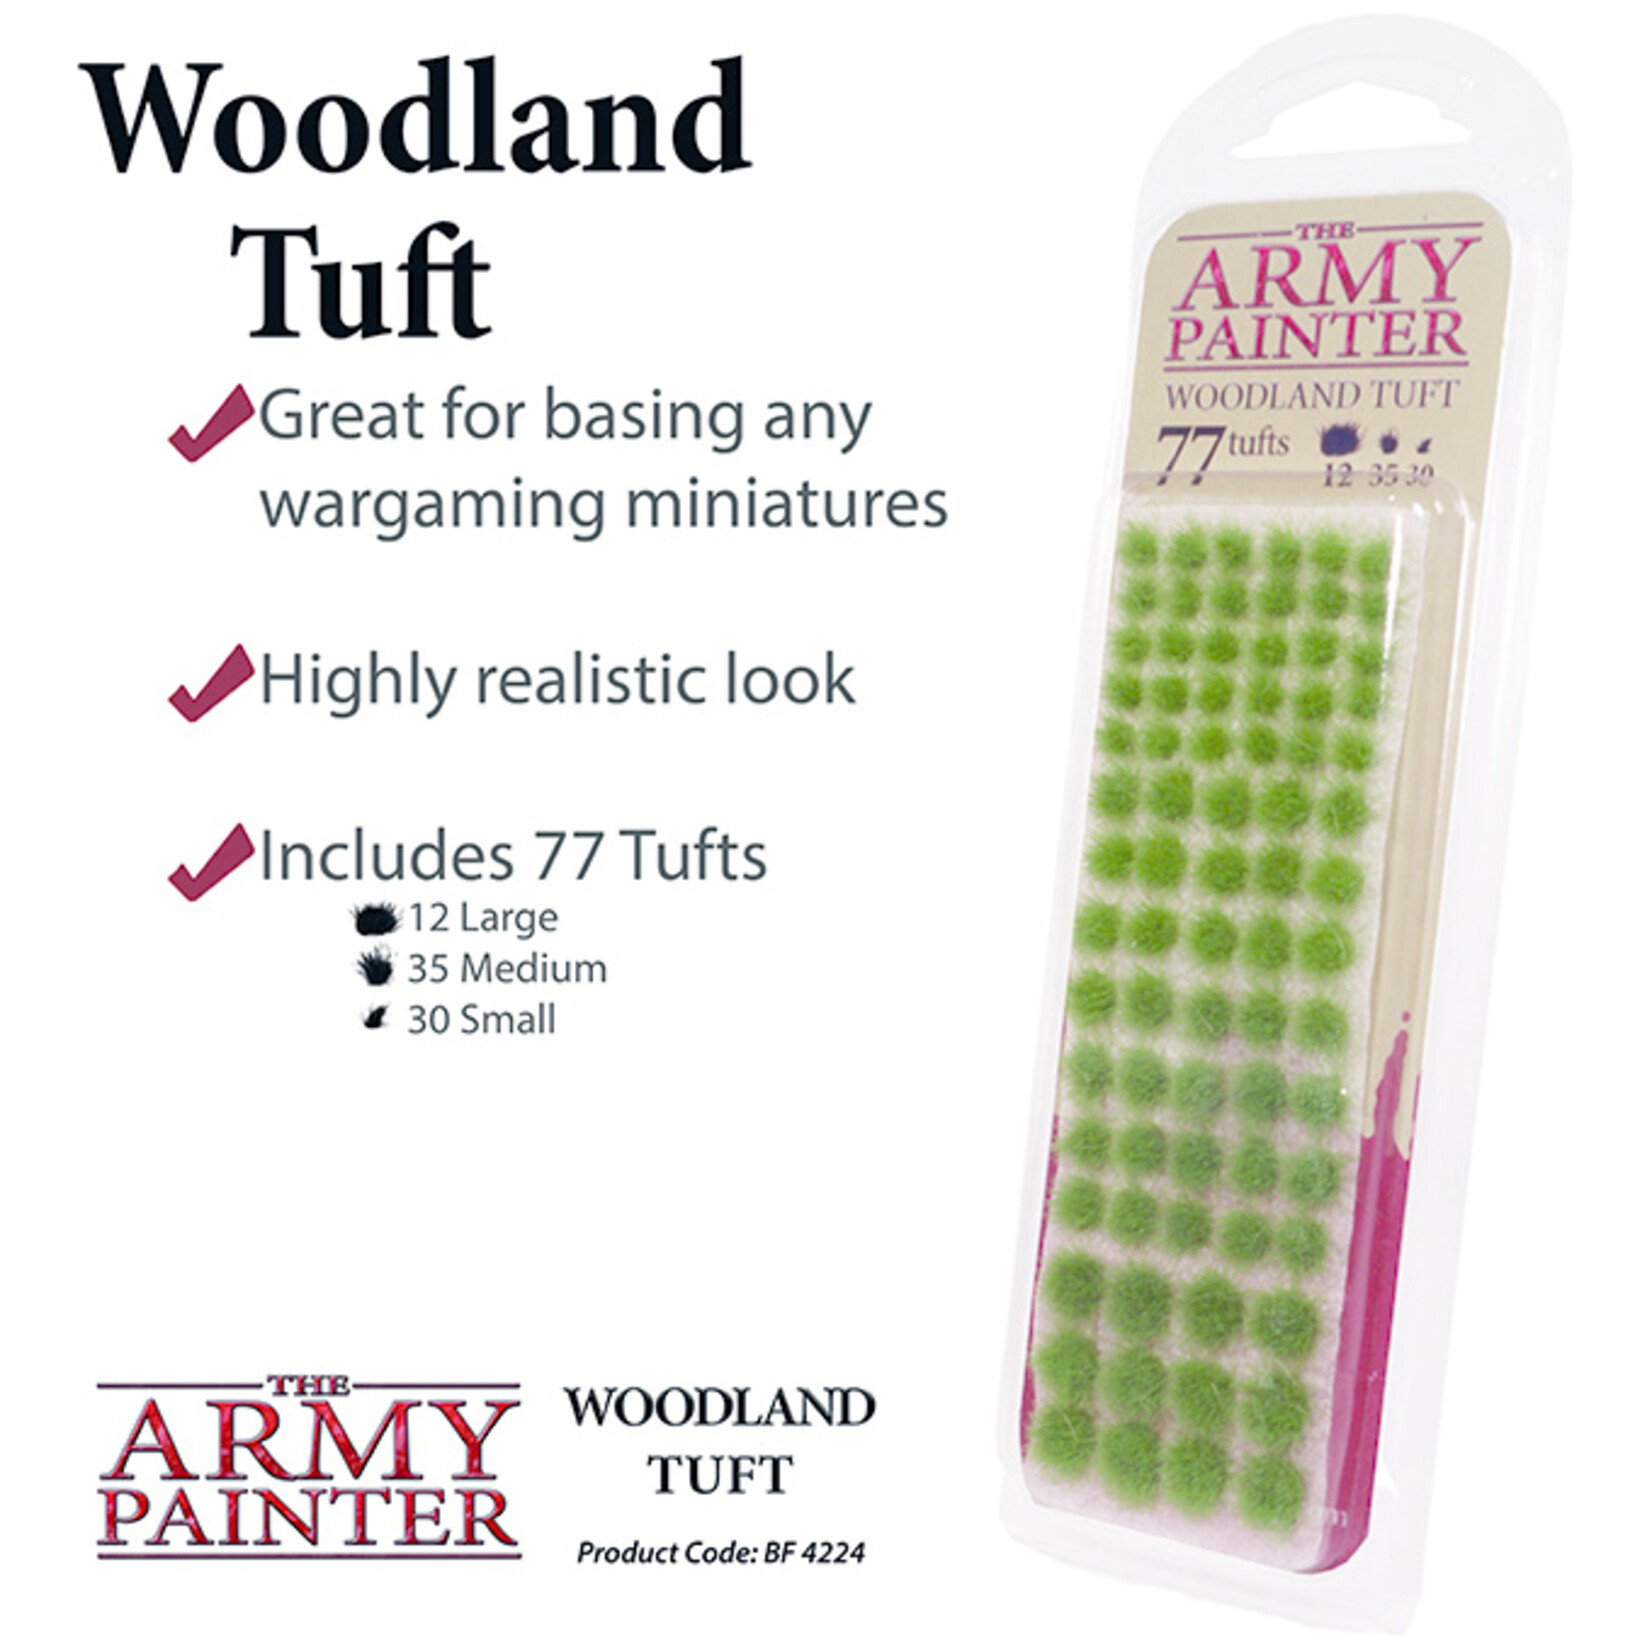 The Army Painter The Army Painter Tufts - Woodland